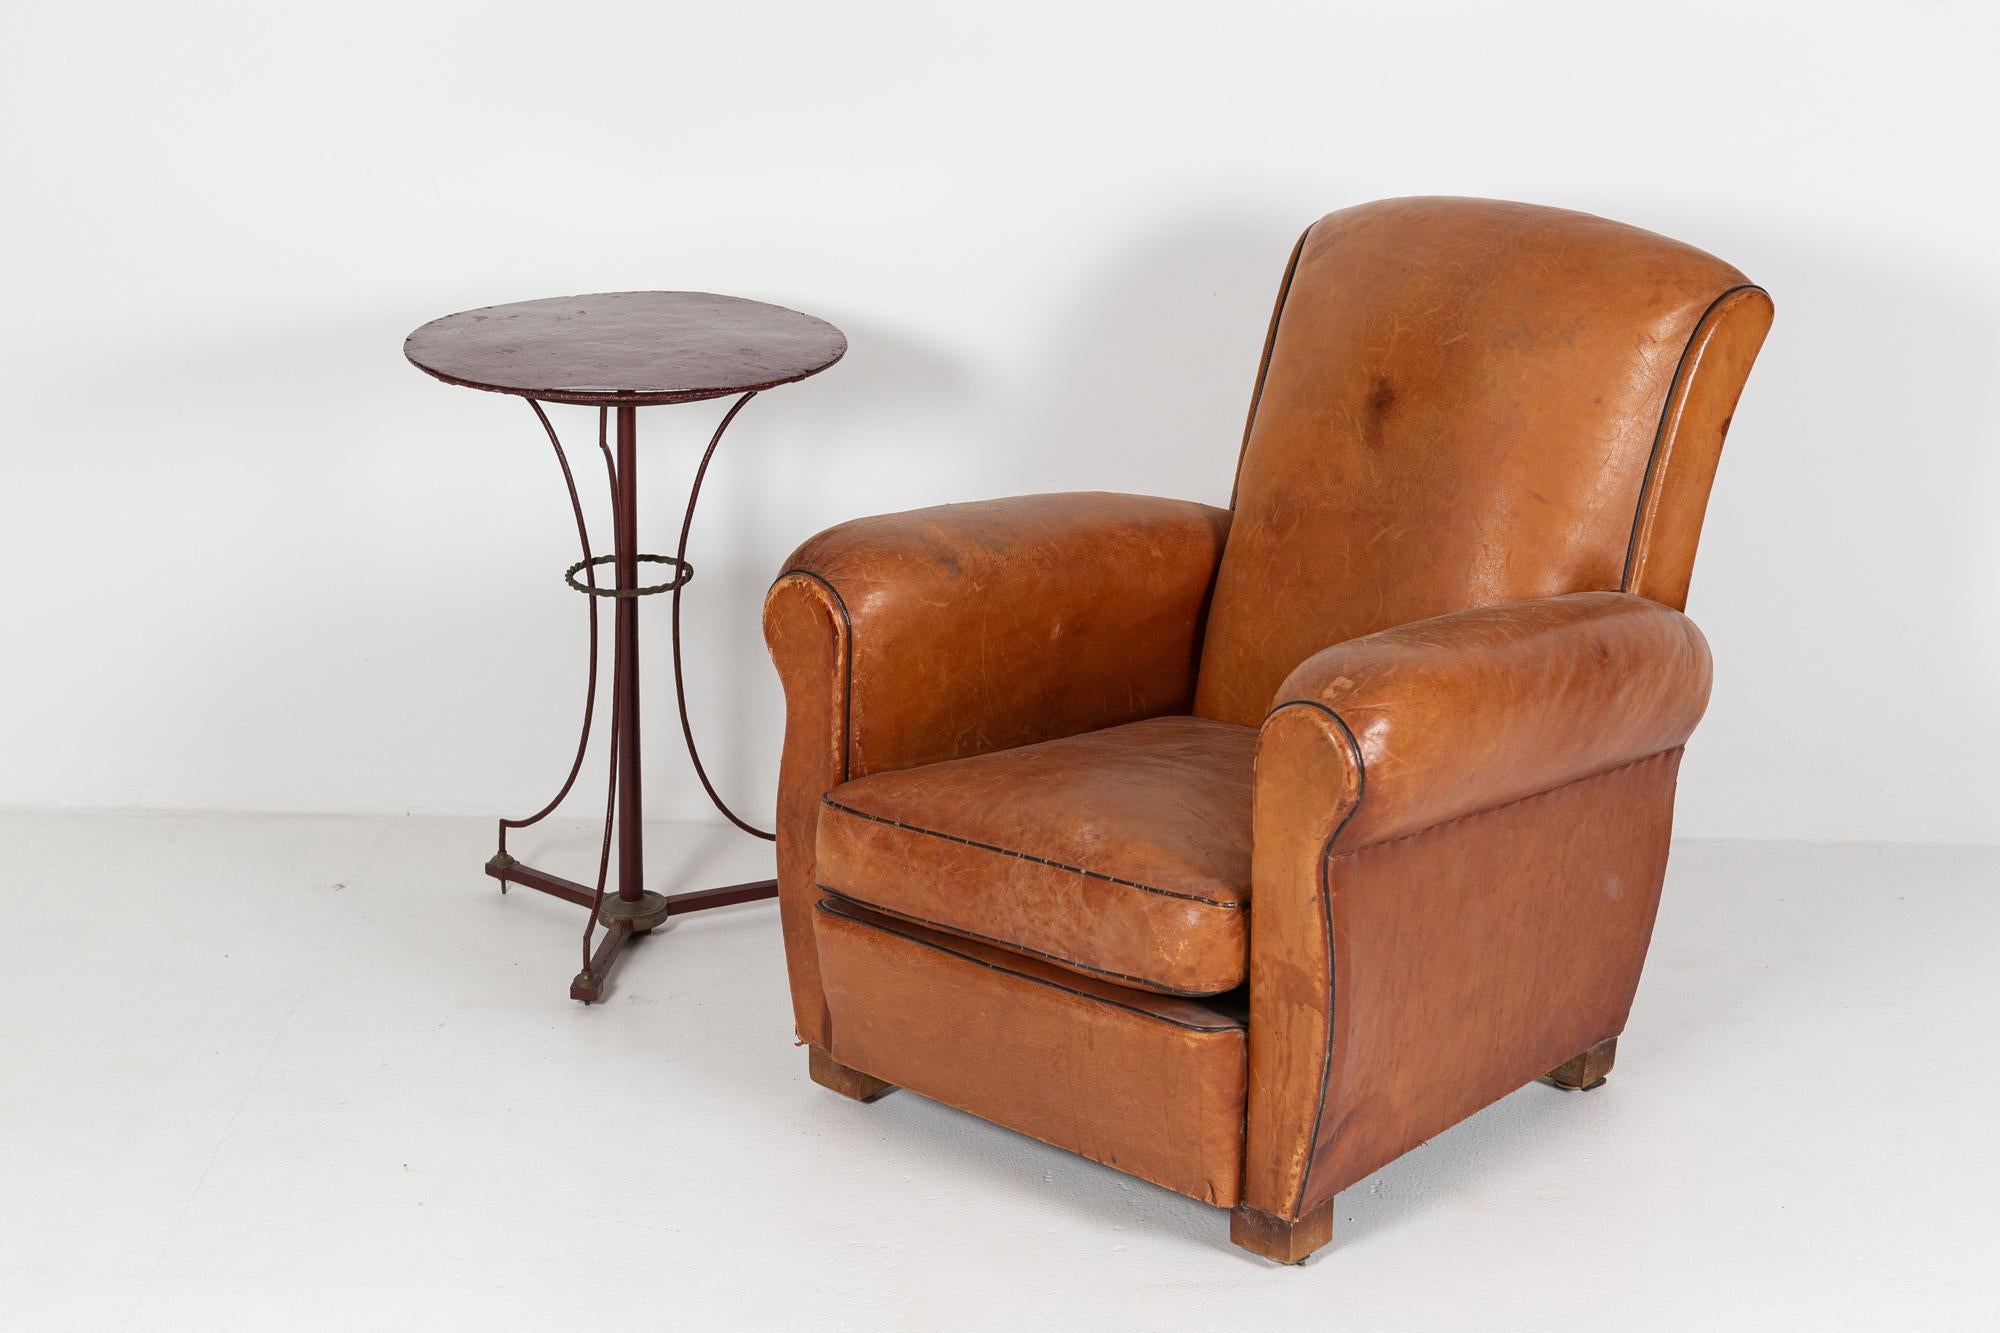 Circa 1920.

French Tan Leather Club Armchair

The usual scuffs & stains

Sourced from the South of France

sku. 742

Measures: W 78 x D 92 x H 88 cm

Seat height 38 cm.

 